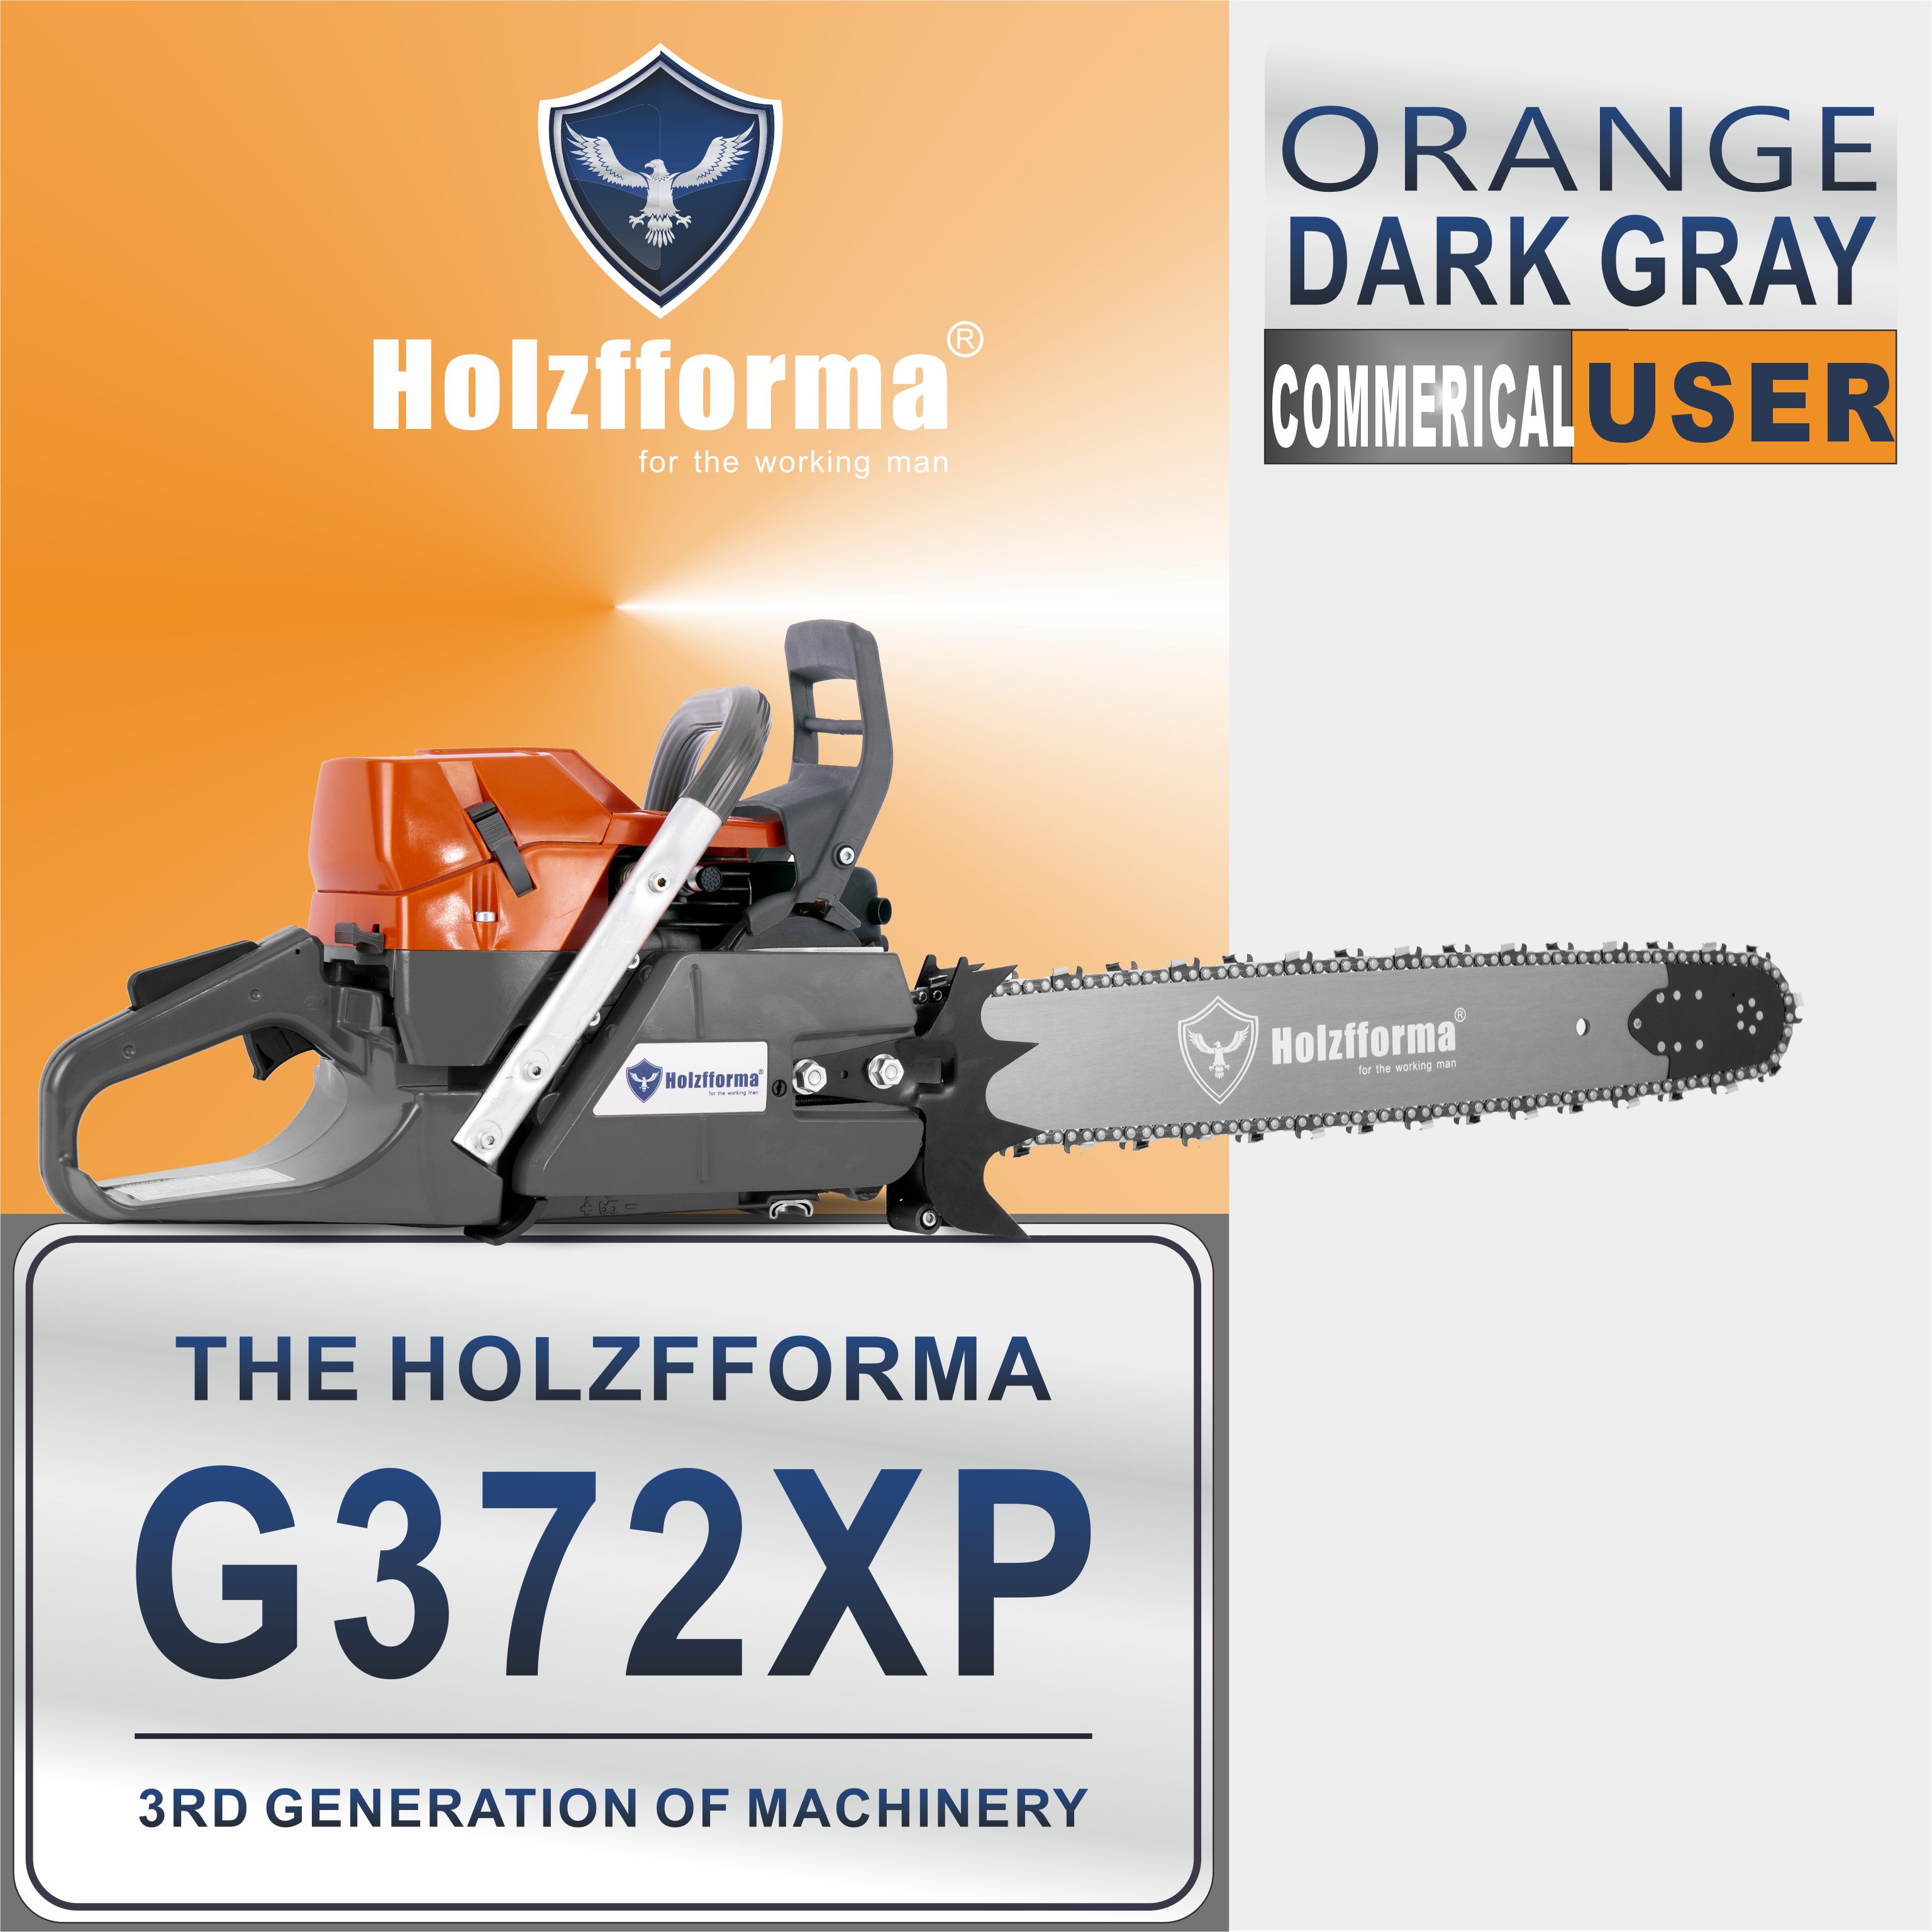 71cc Holzfforma® Orange Dark Gray G372XP Gasoline Chain Saw Power Head 50mm Bore Without Guide Bar and Chain Top Quality By Farmertec All Parts Are For Husqvarna 372XP Chainsaw